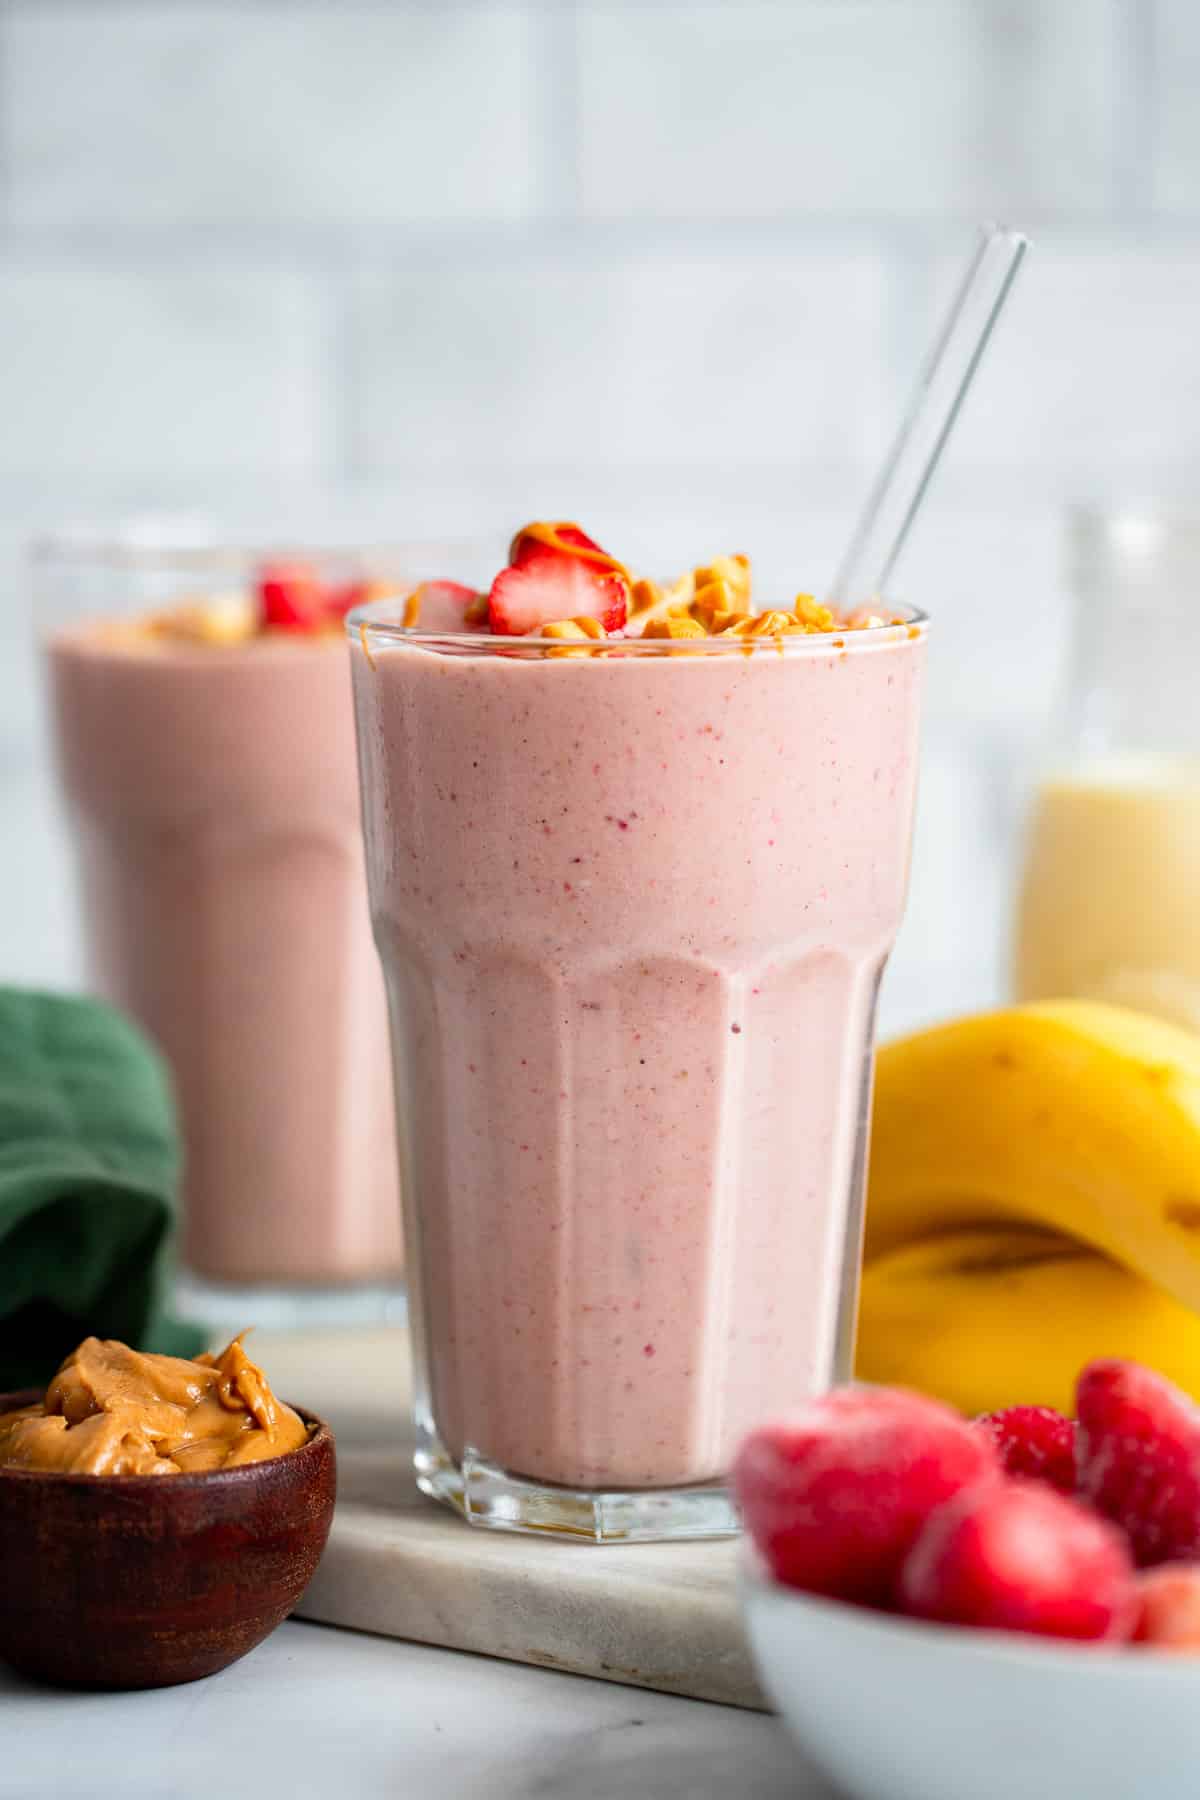 prepared healthy strawberry peanut butter smoothie ready to drink